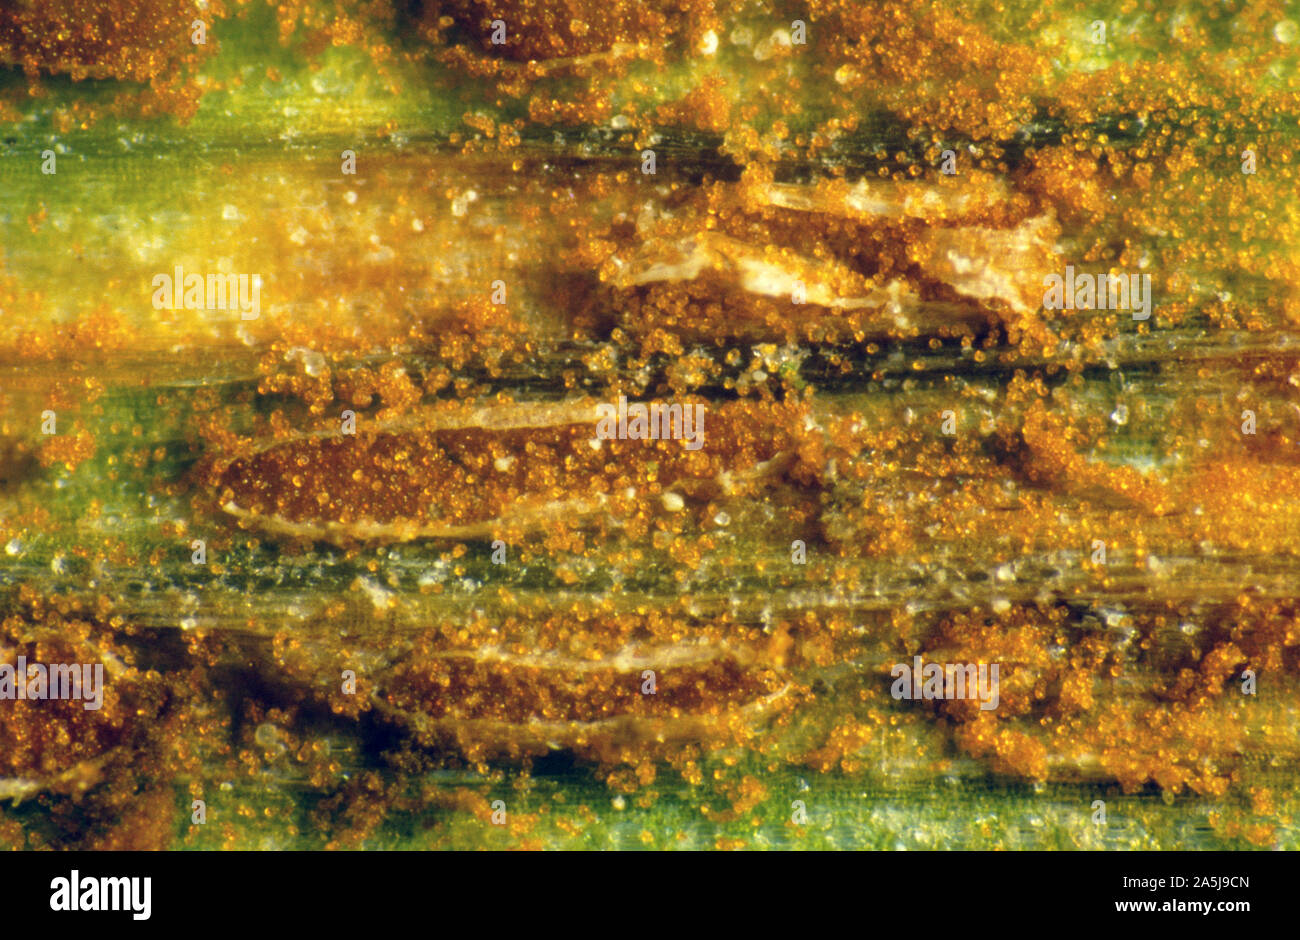 Wheat leaf rust or brown rust (Puccinia triticina) erupting leaf pustules on wheat releasing spores of fungal disease Stock Photo